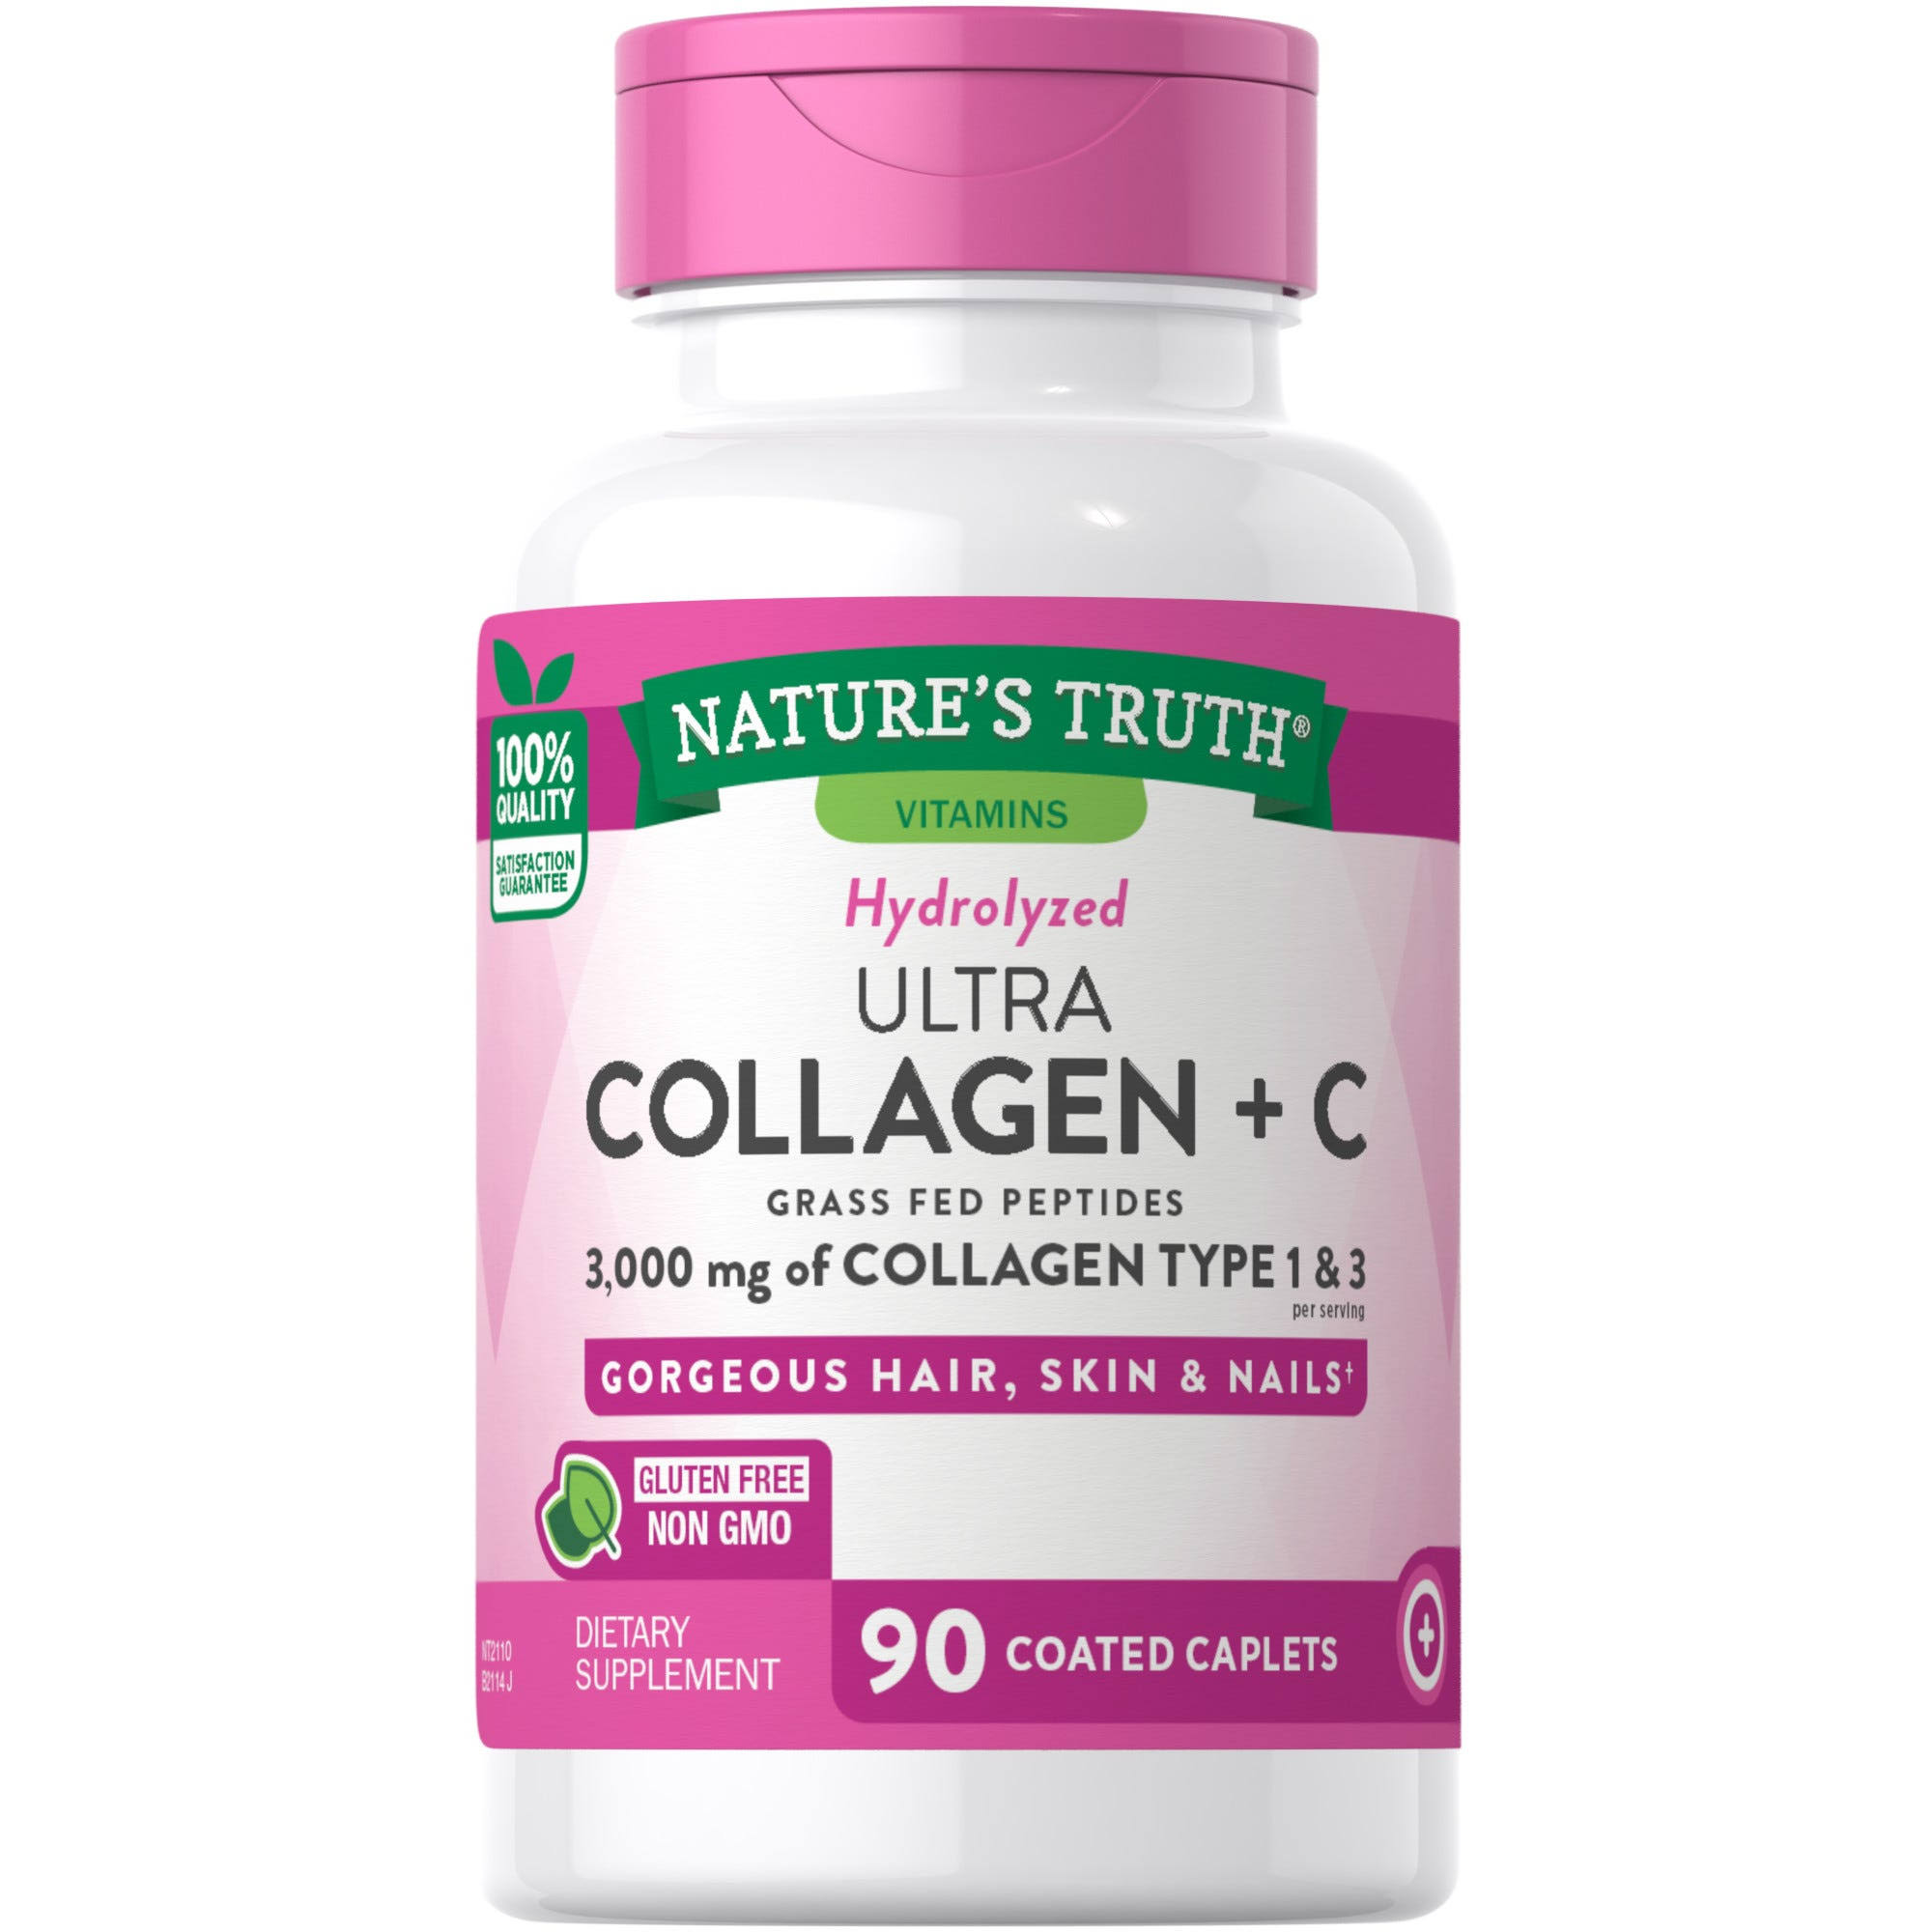 Nature's Truth Hydrolyzed Collagen Type 1 & Ii Vitamin C - 90 Caplets, 1000mg